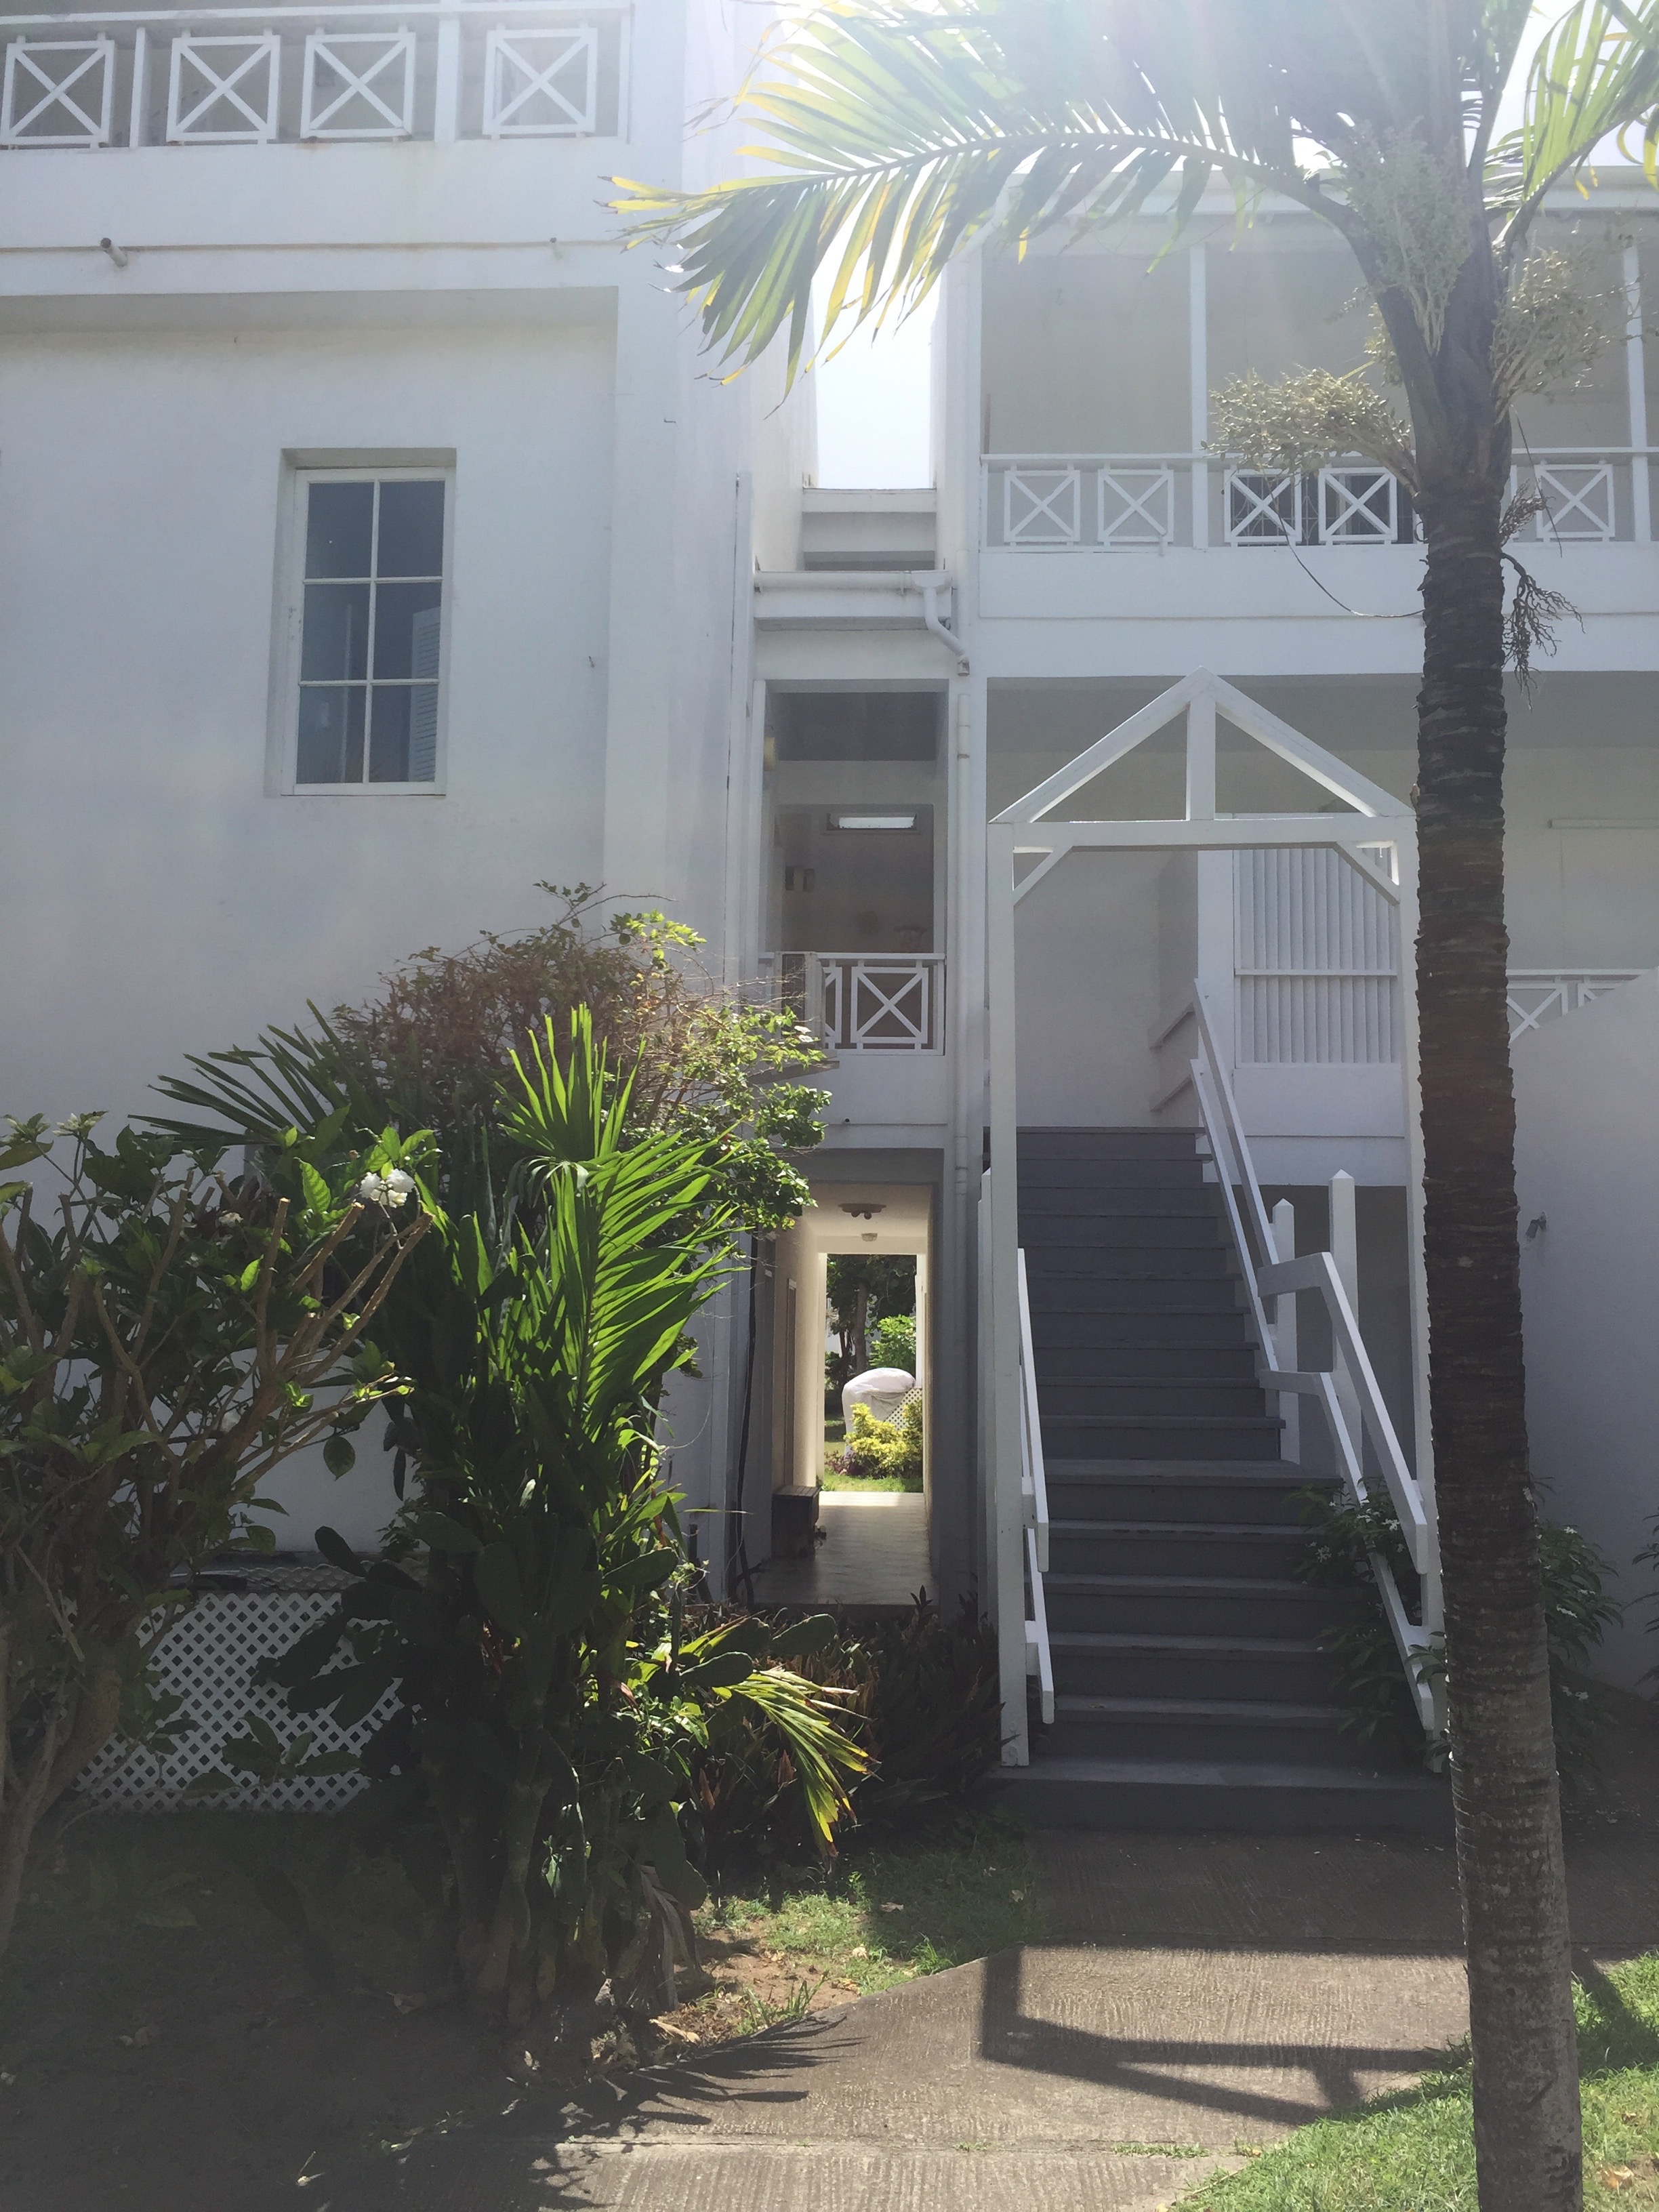 St. Christopher Club 2 Bed - 2 Bath Condo for Rent Frigate Bay St. Kitts